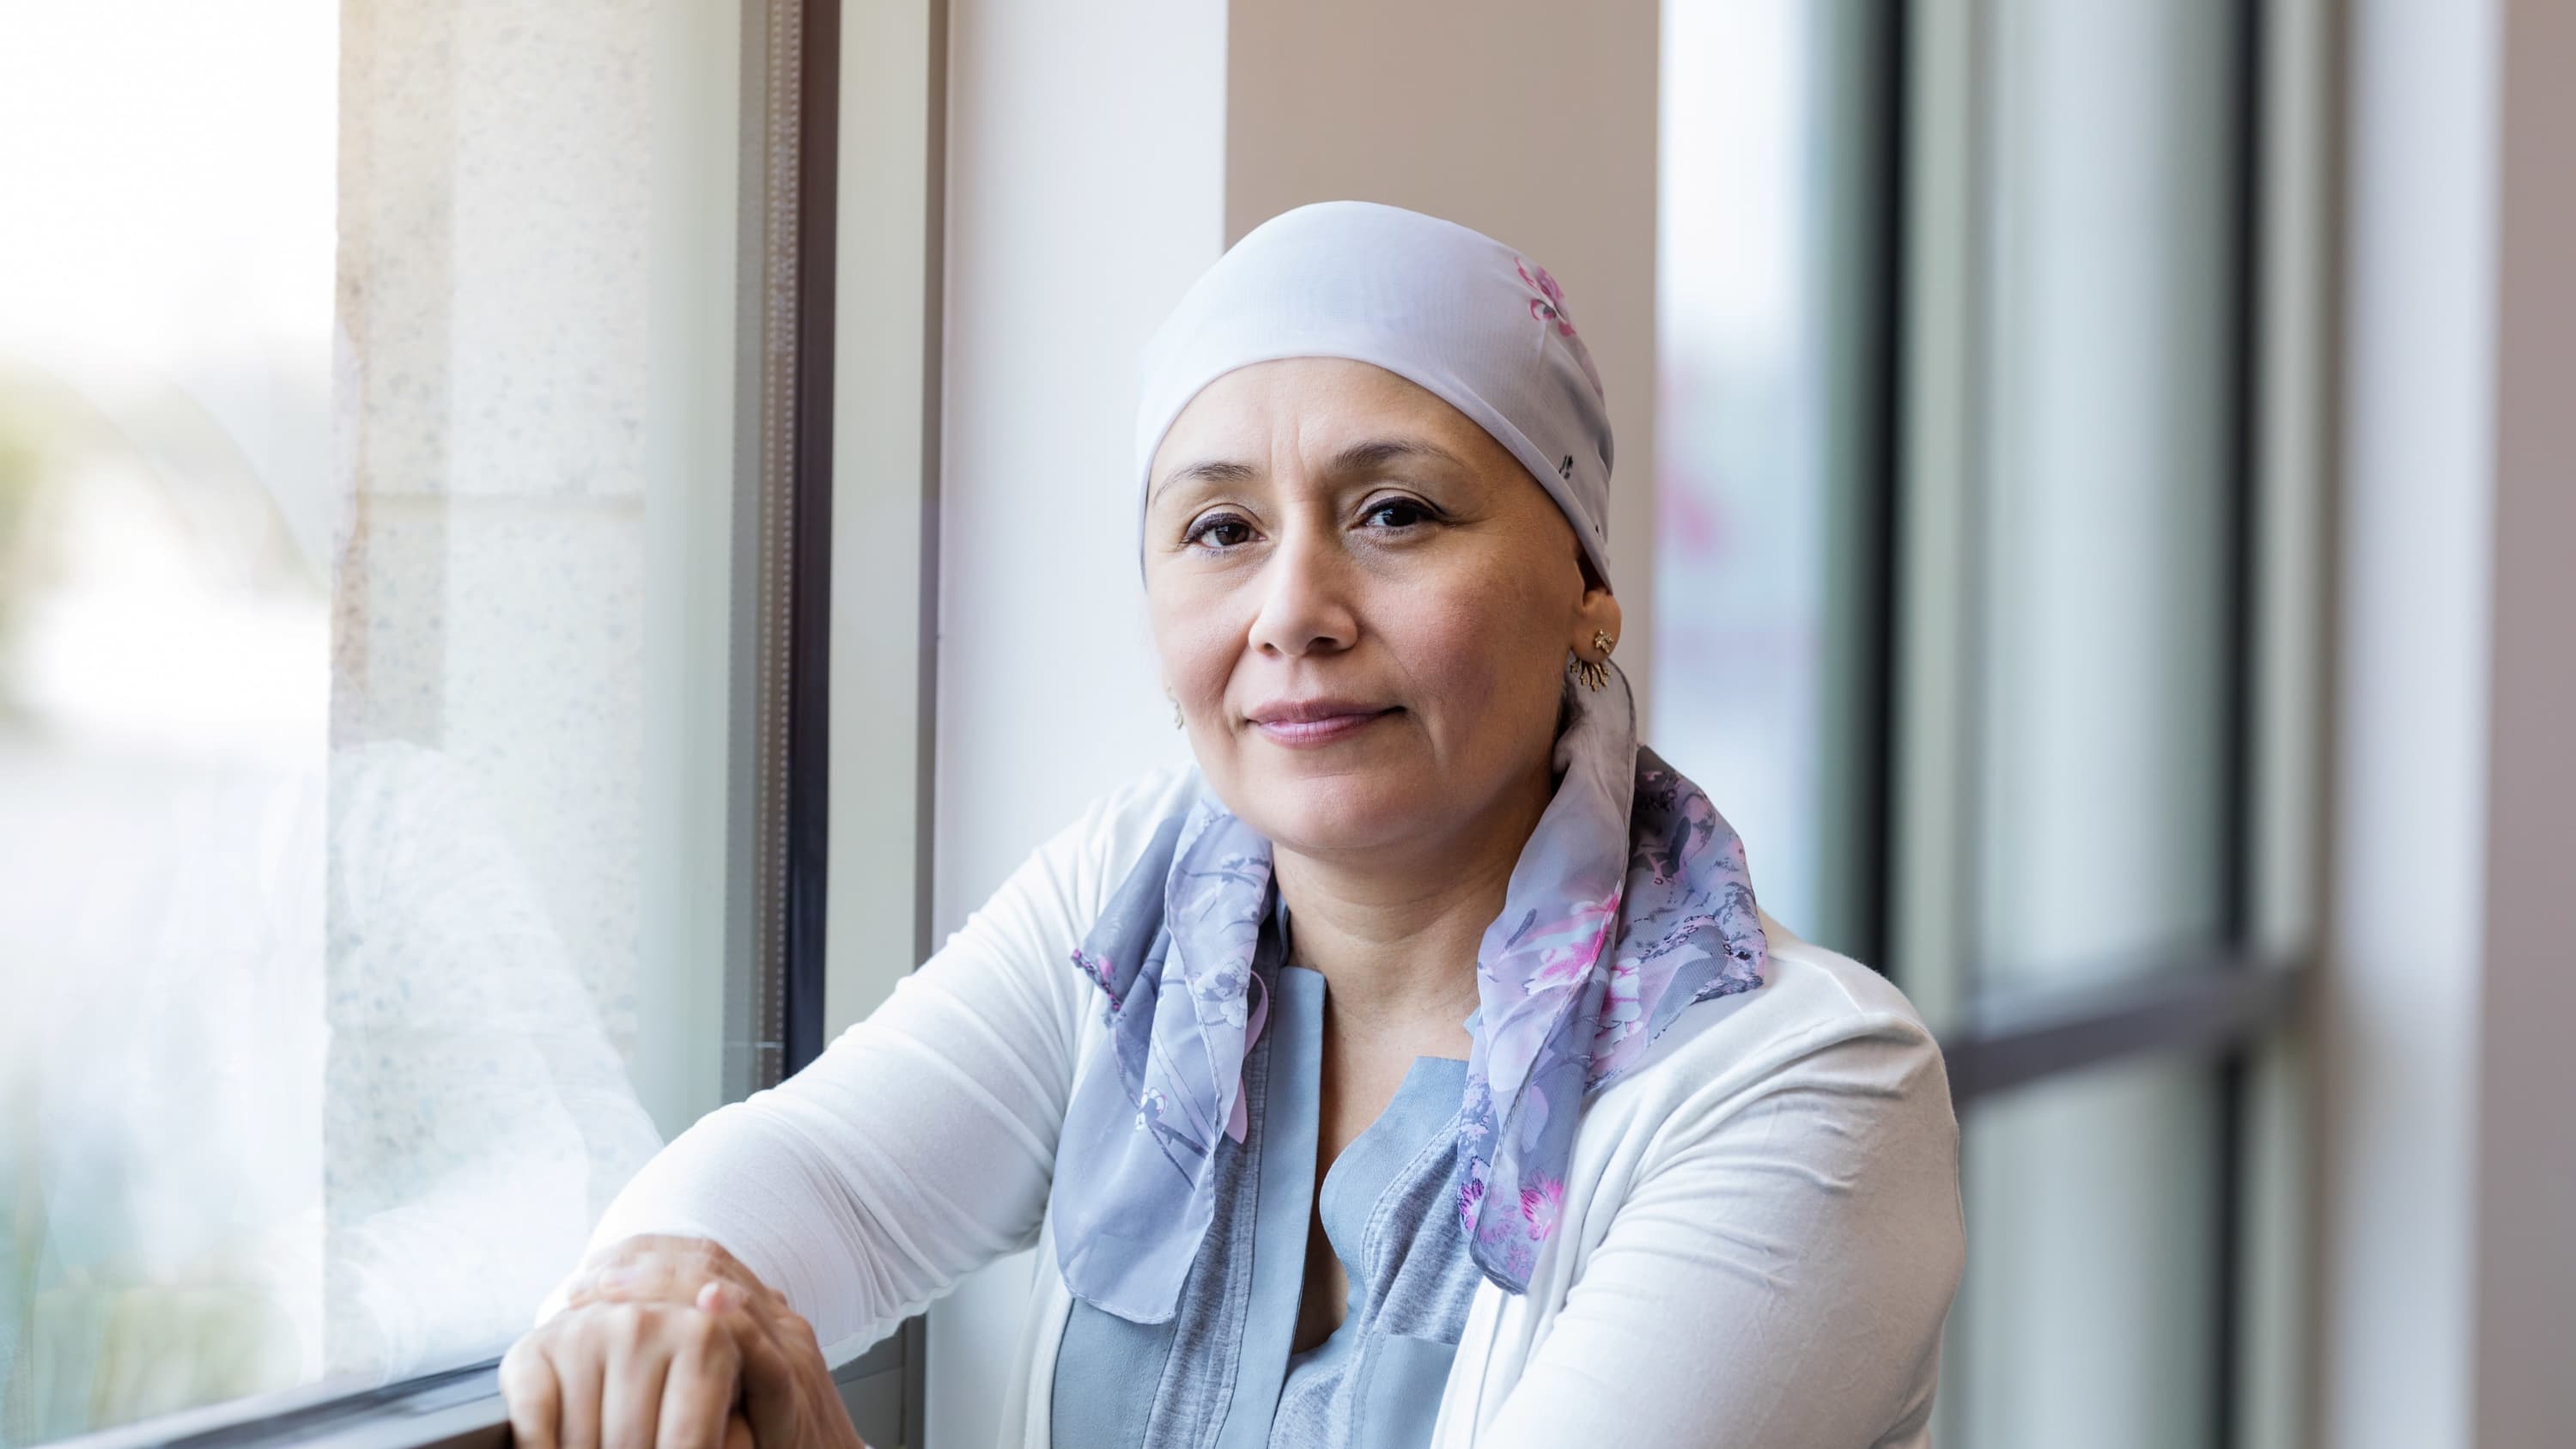 Middle-aged woman fighting cancer, after having a sentinel lymph node biopsy